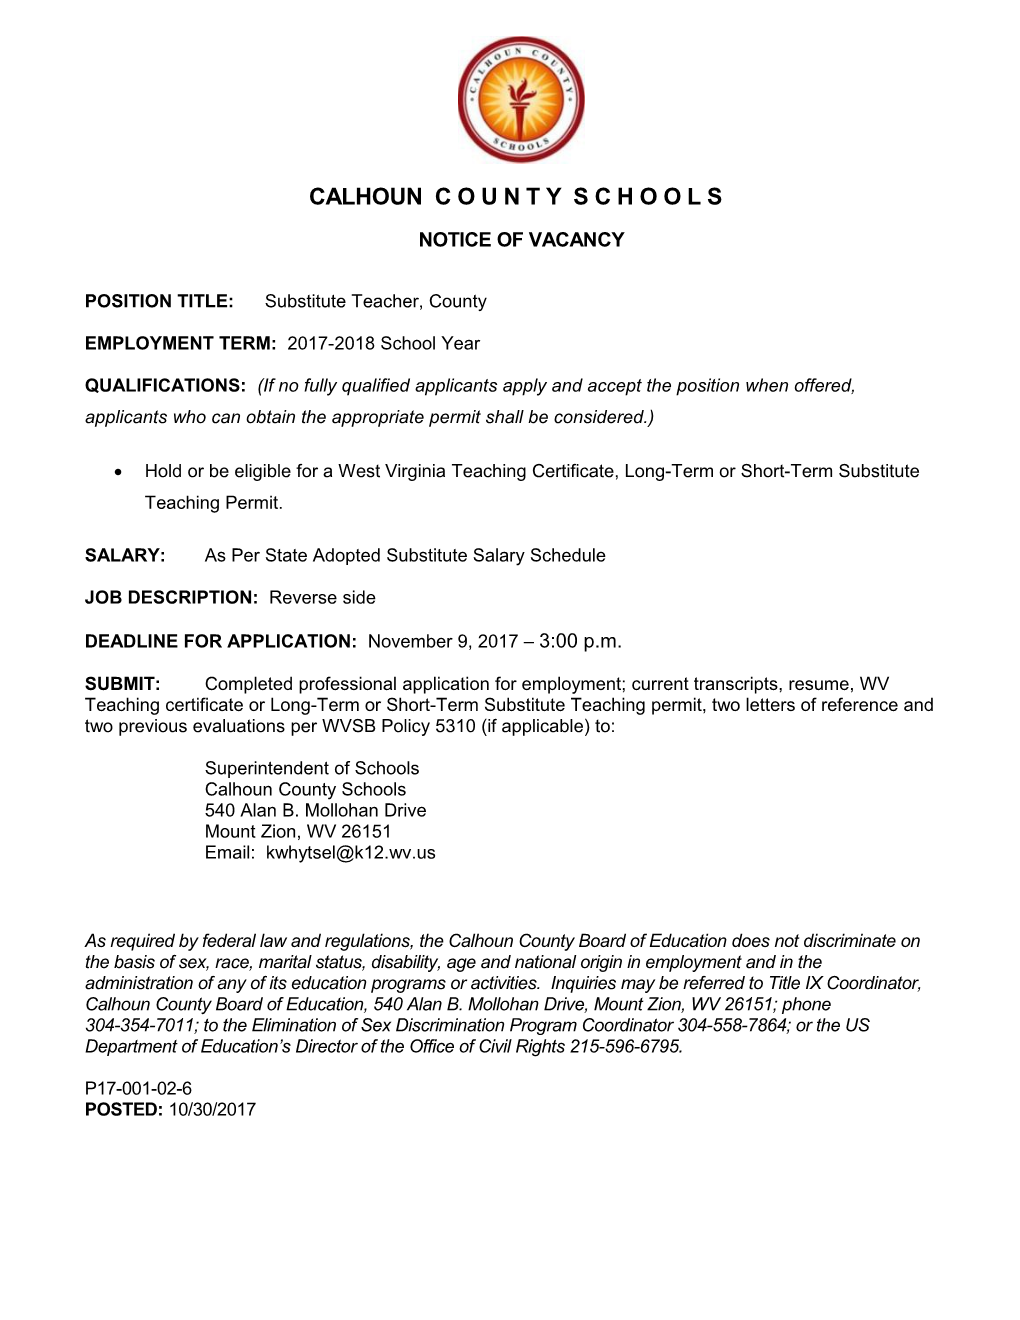 POSITION TITLE:Substitute Teacher, County